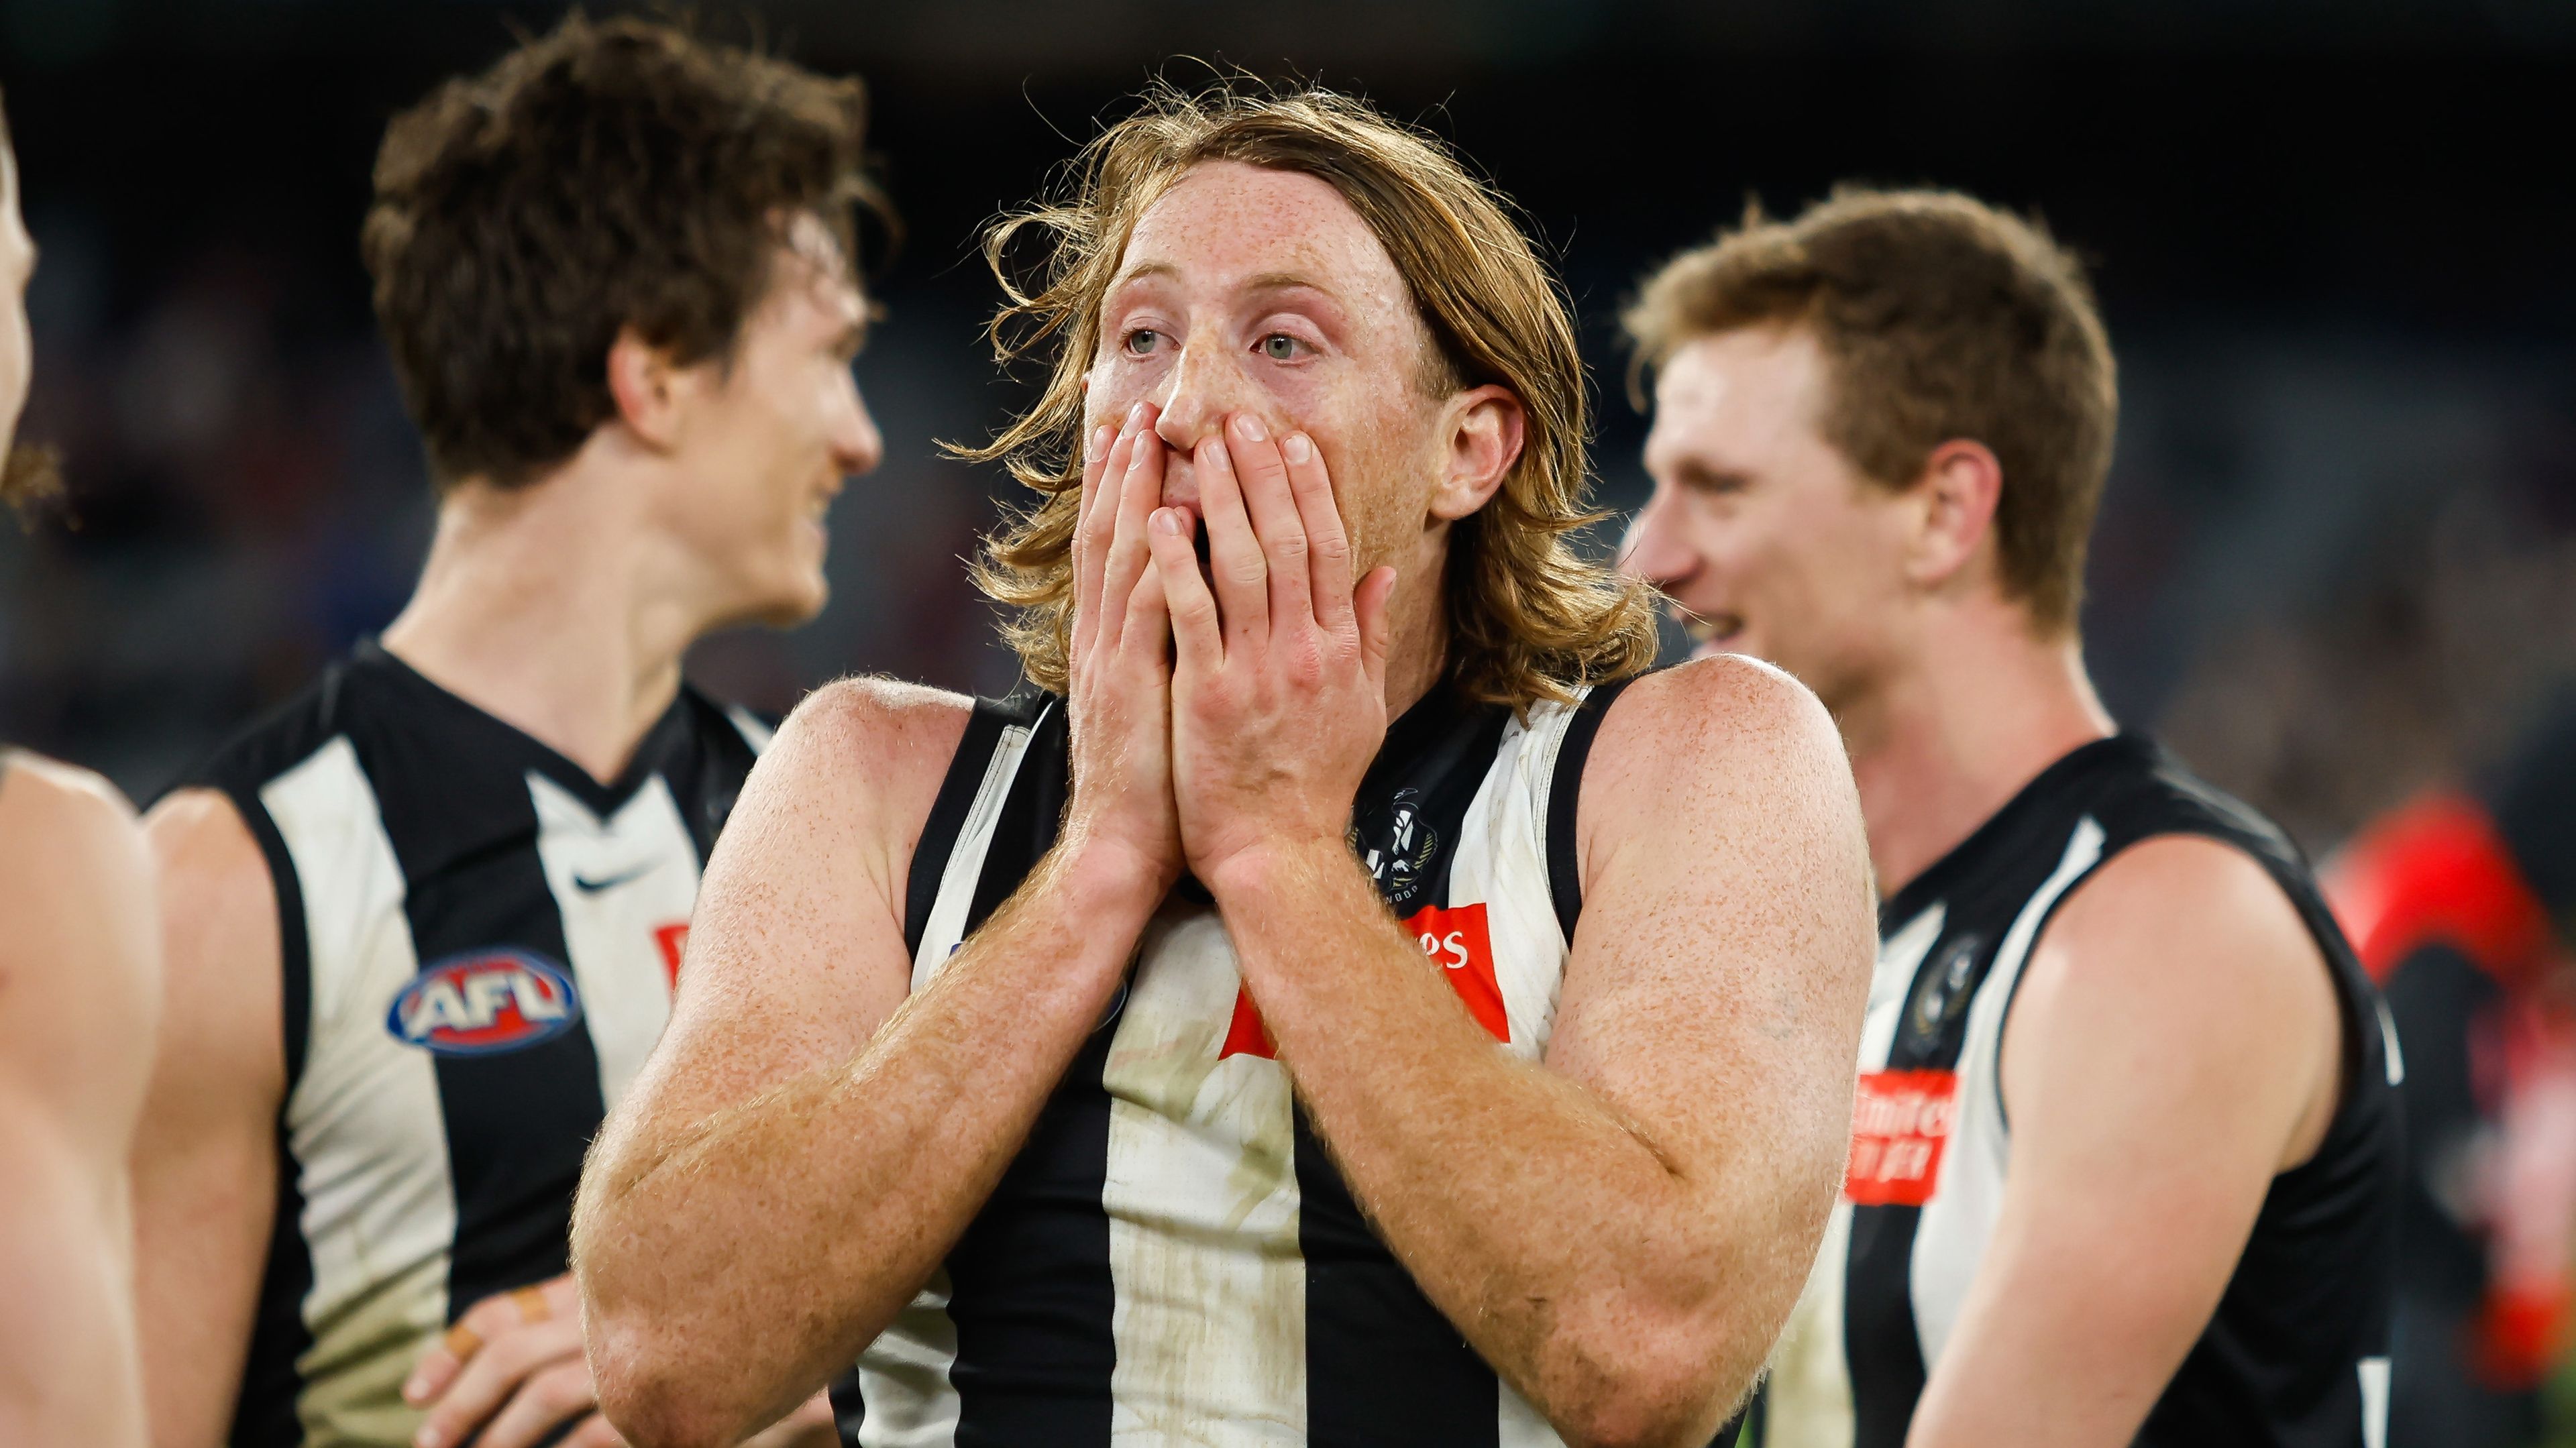 Nathan Murphy of the Magpies celebrates at the Melbourne Cricket Ground.